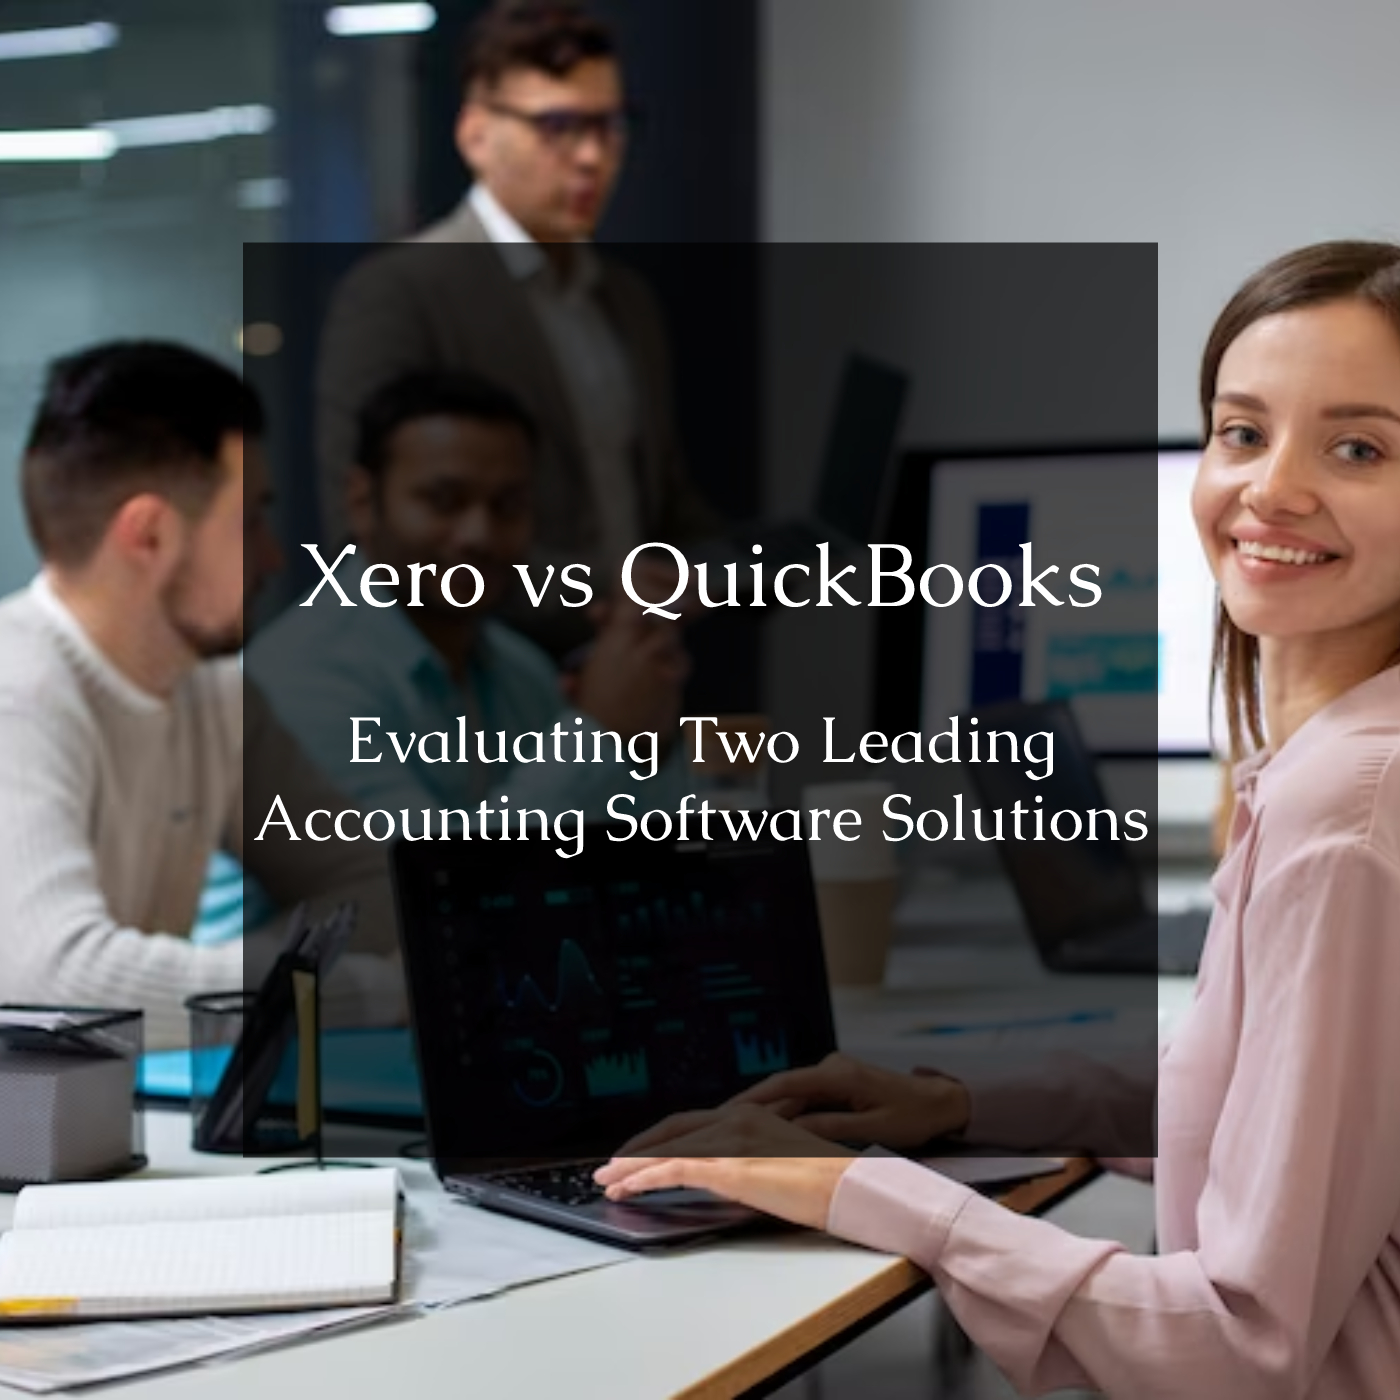 Xero vs QuickBooks: Evaluating Two Leading Accounting Software Solutions